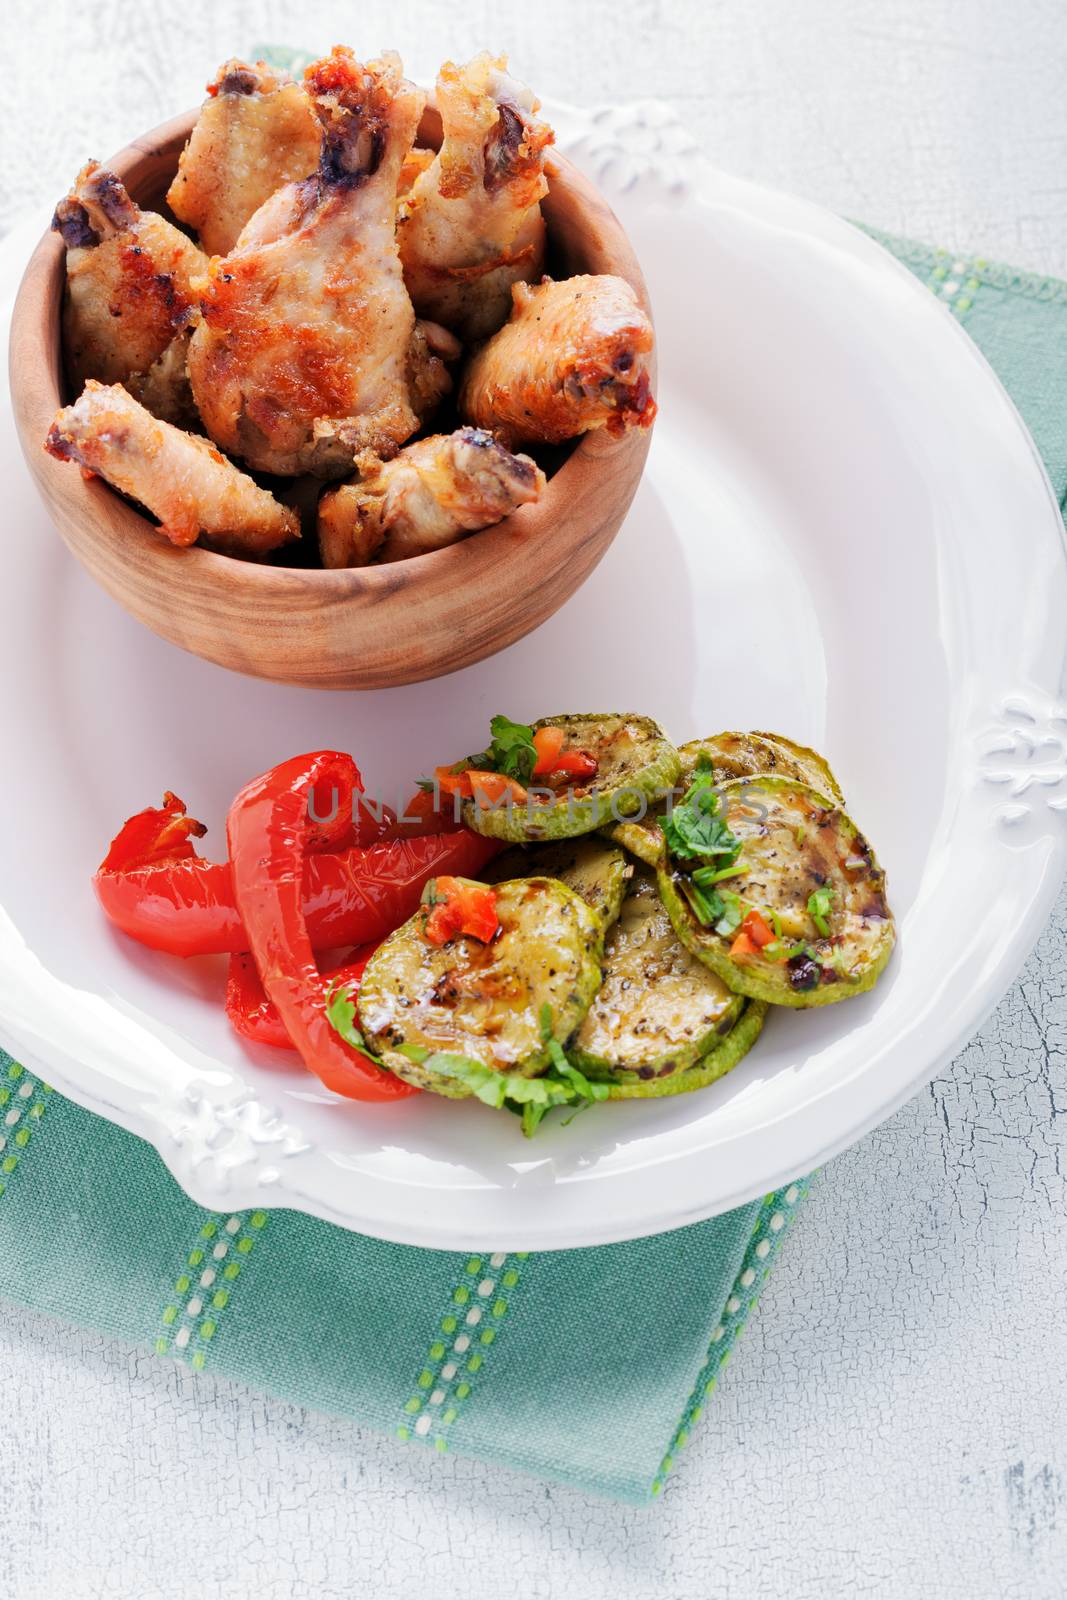 Fried chicken wings and zucchini, pepper on a plate